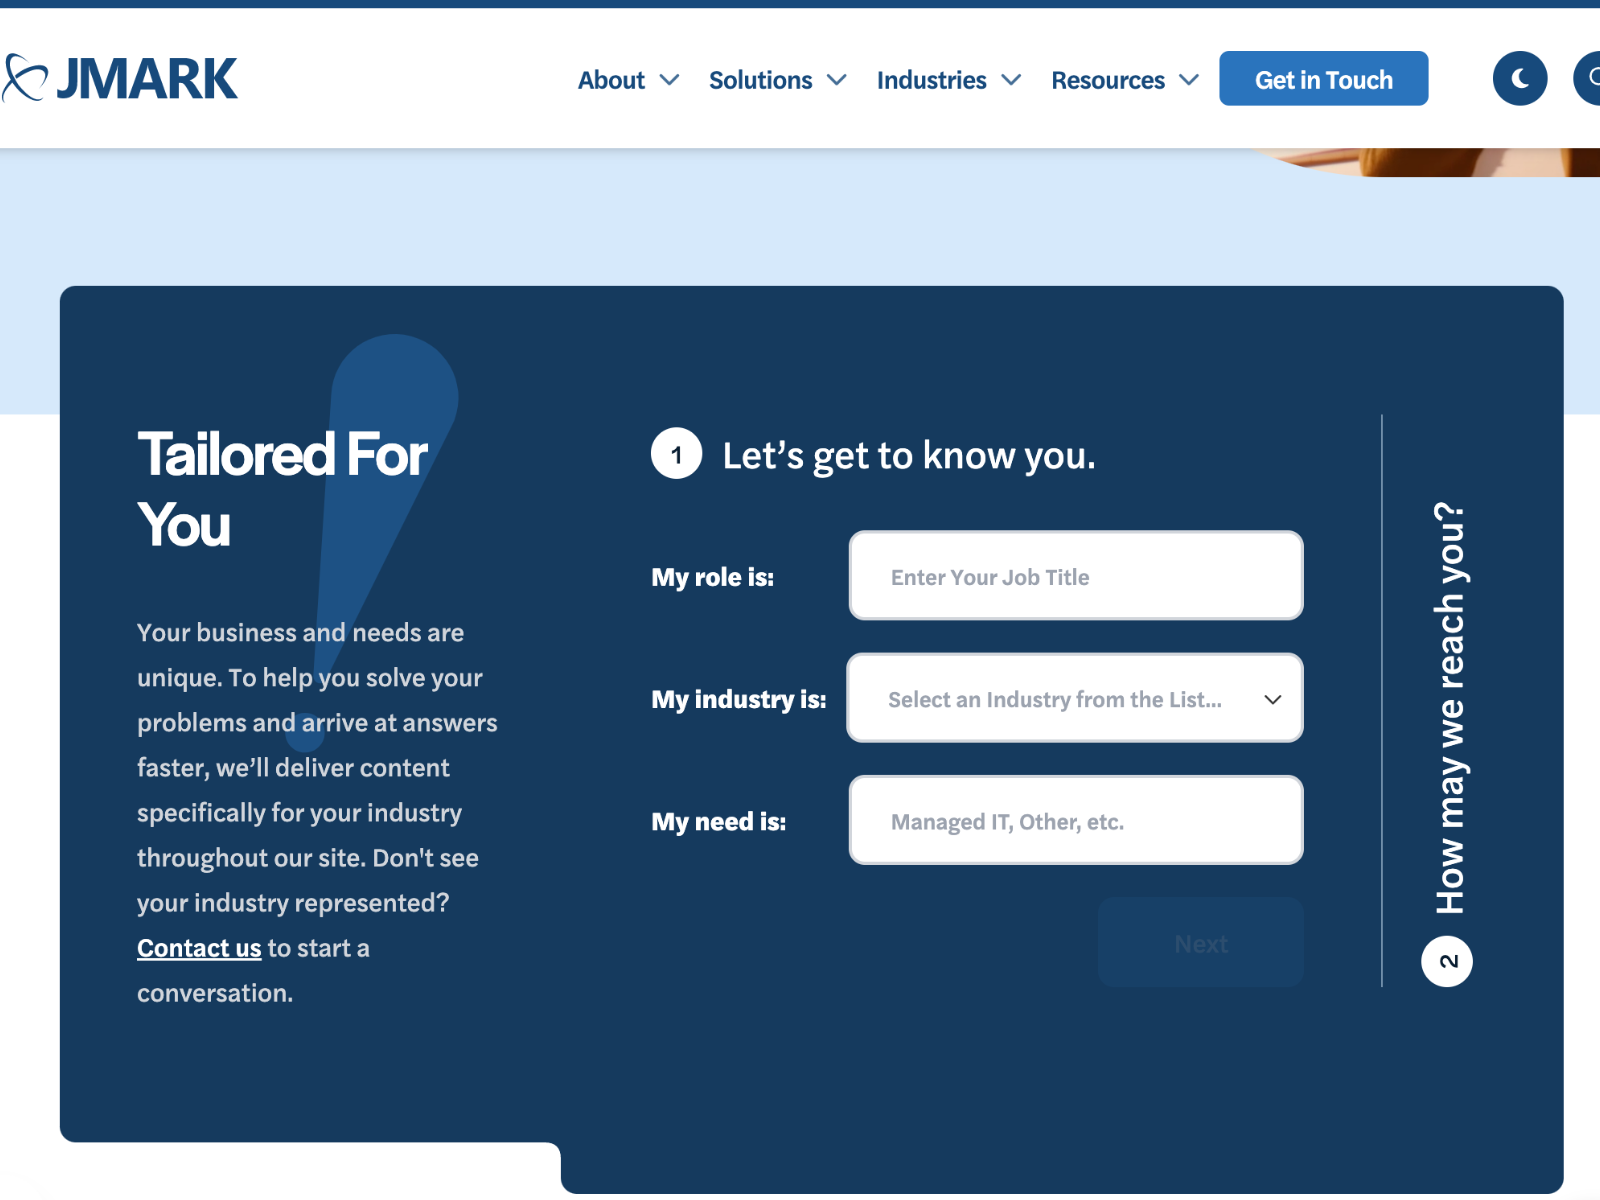 JMARK Personalized User Experience